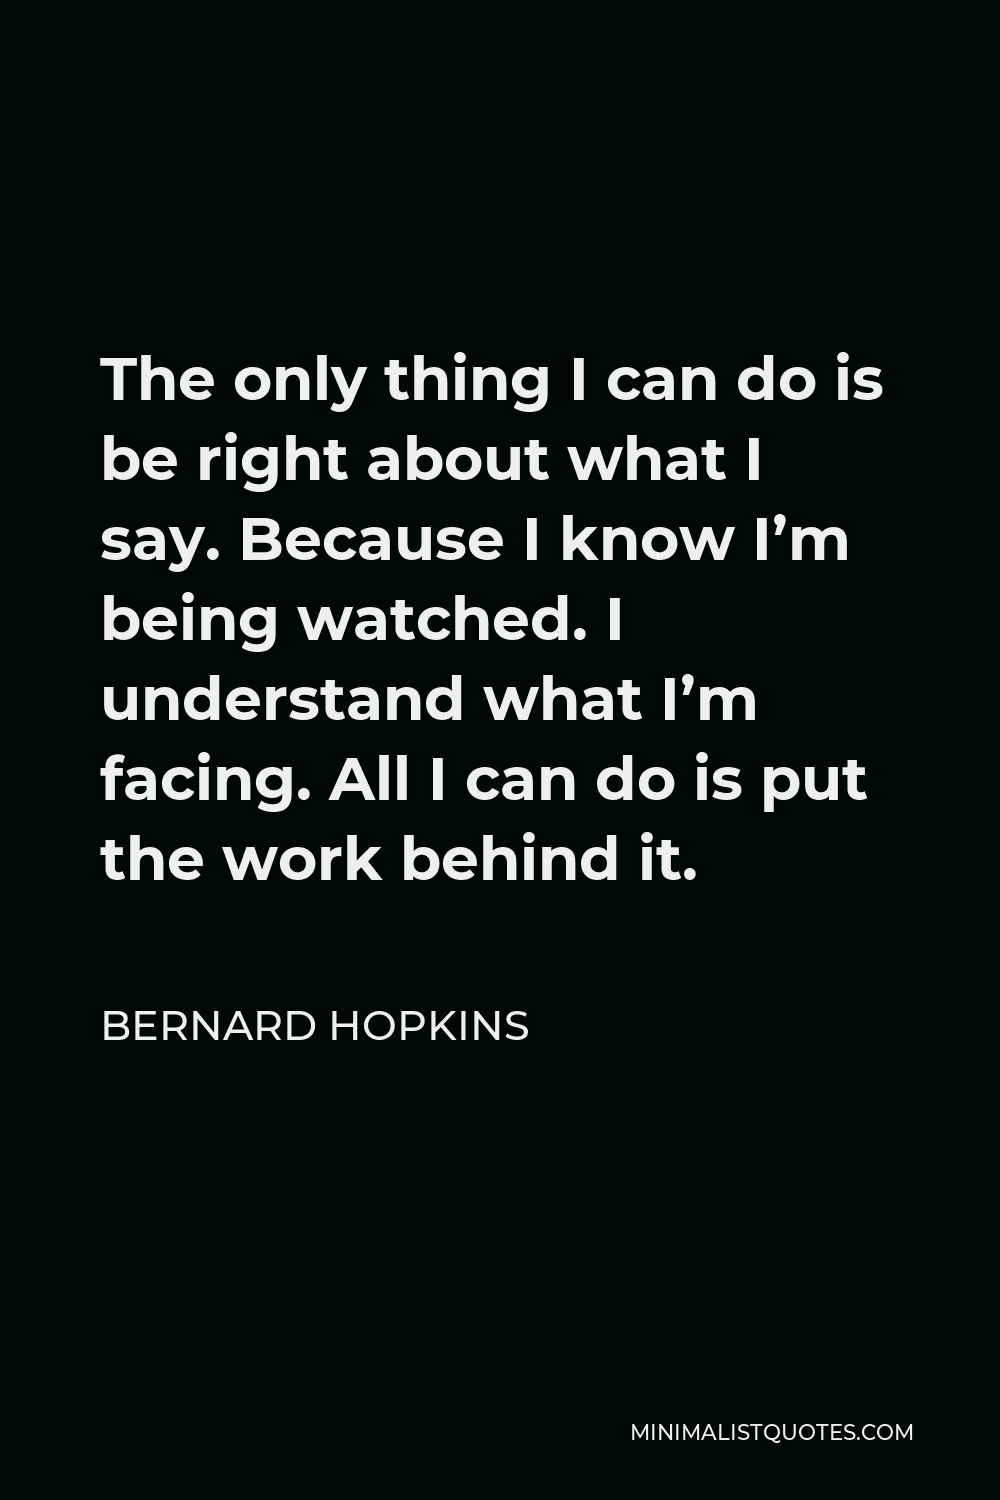 Bernard Hopkins Quote - The only thing I can do is be right about what I say. Because I know I’m being watched. I understand what I’m facing. All I can do is put the work behind it.